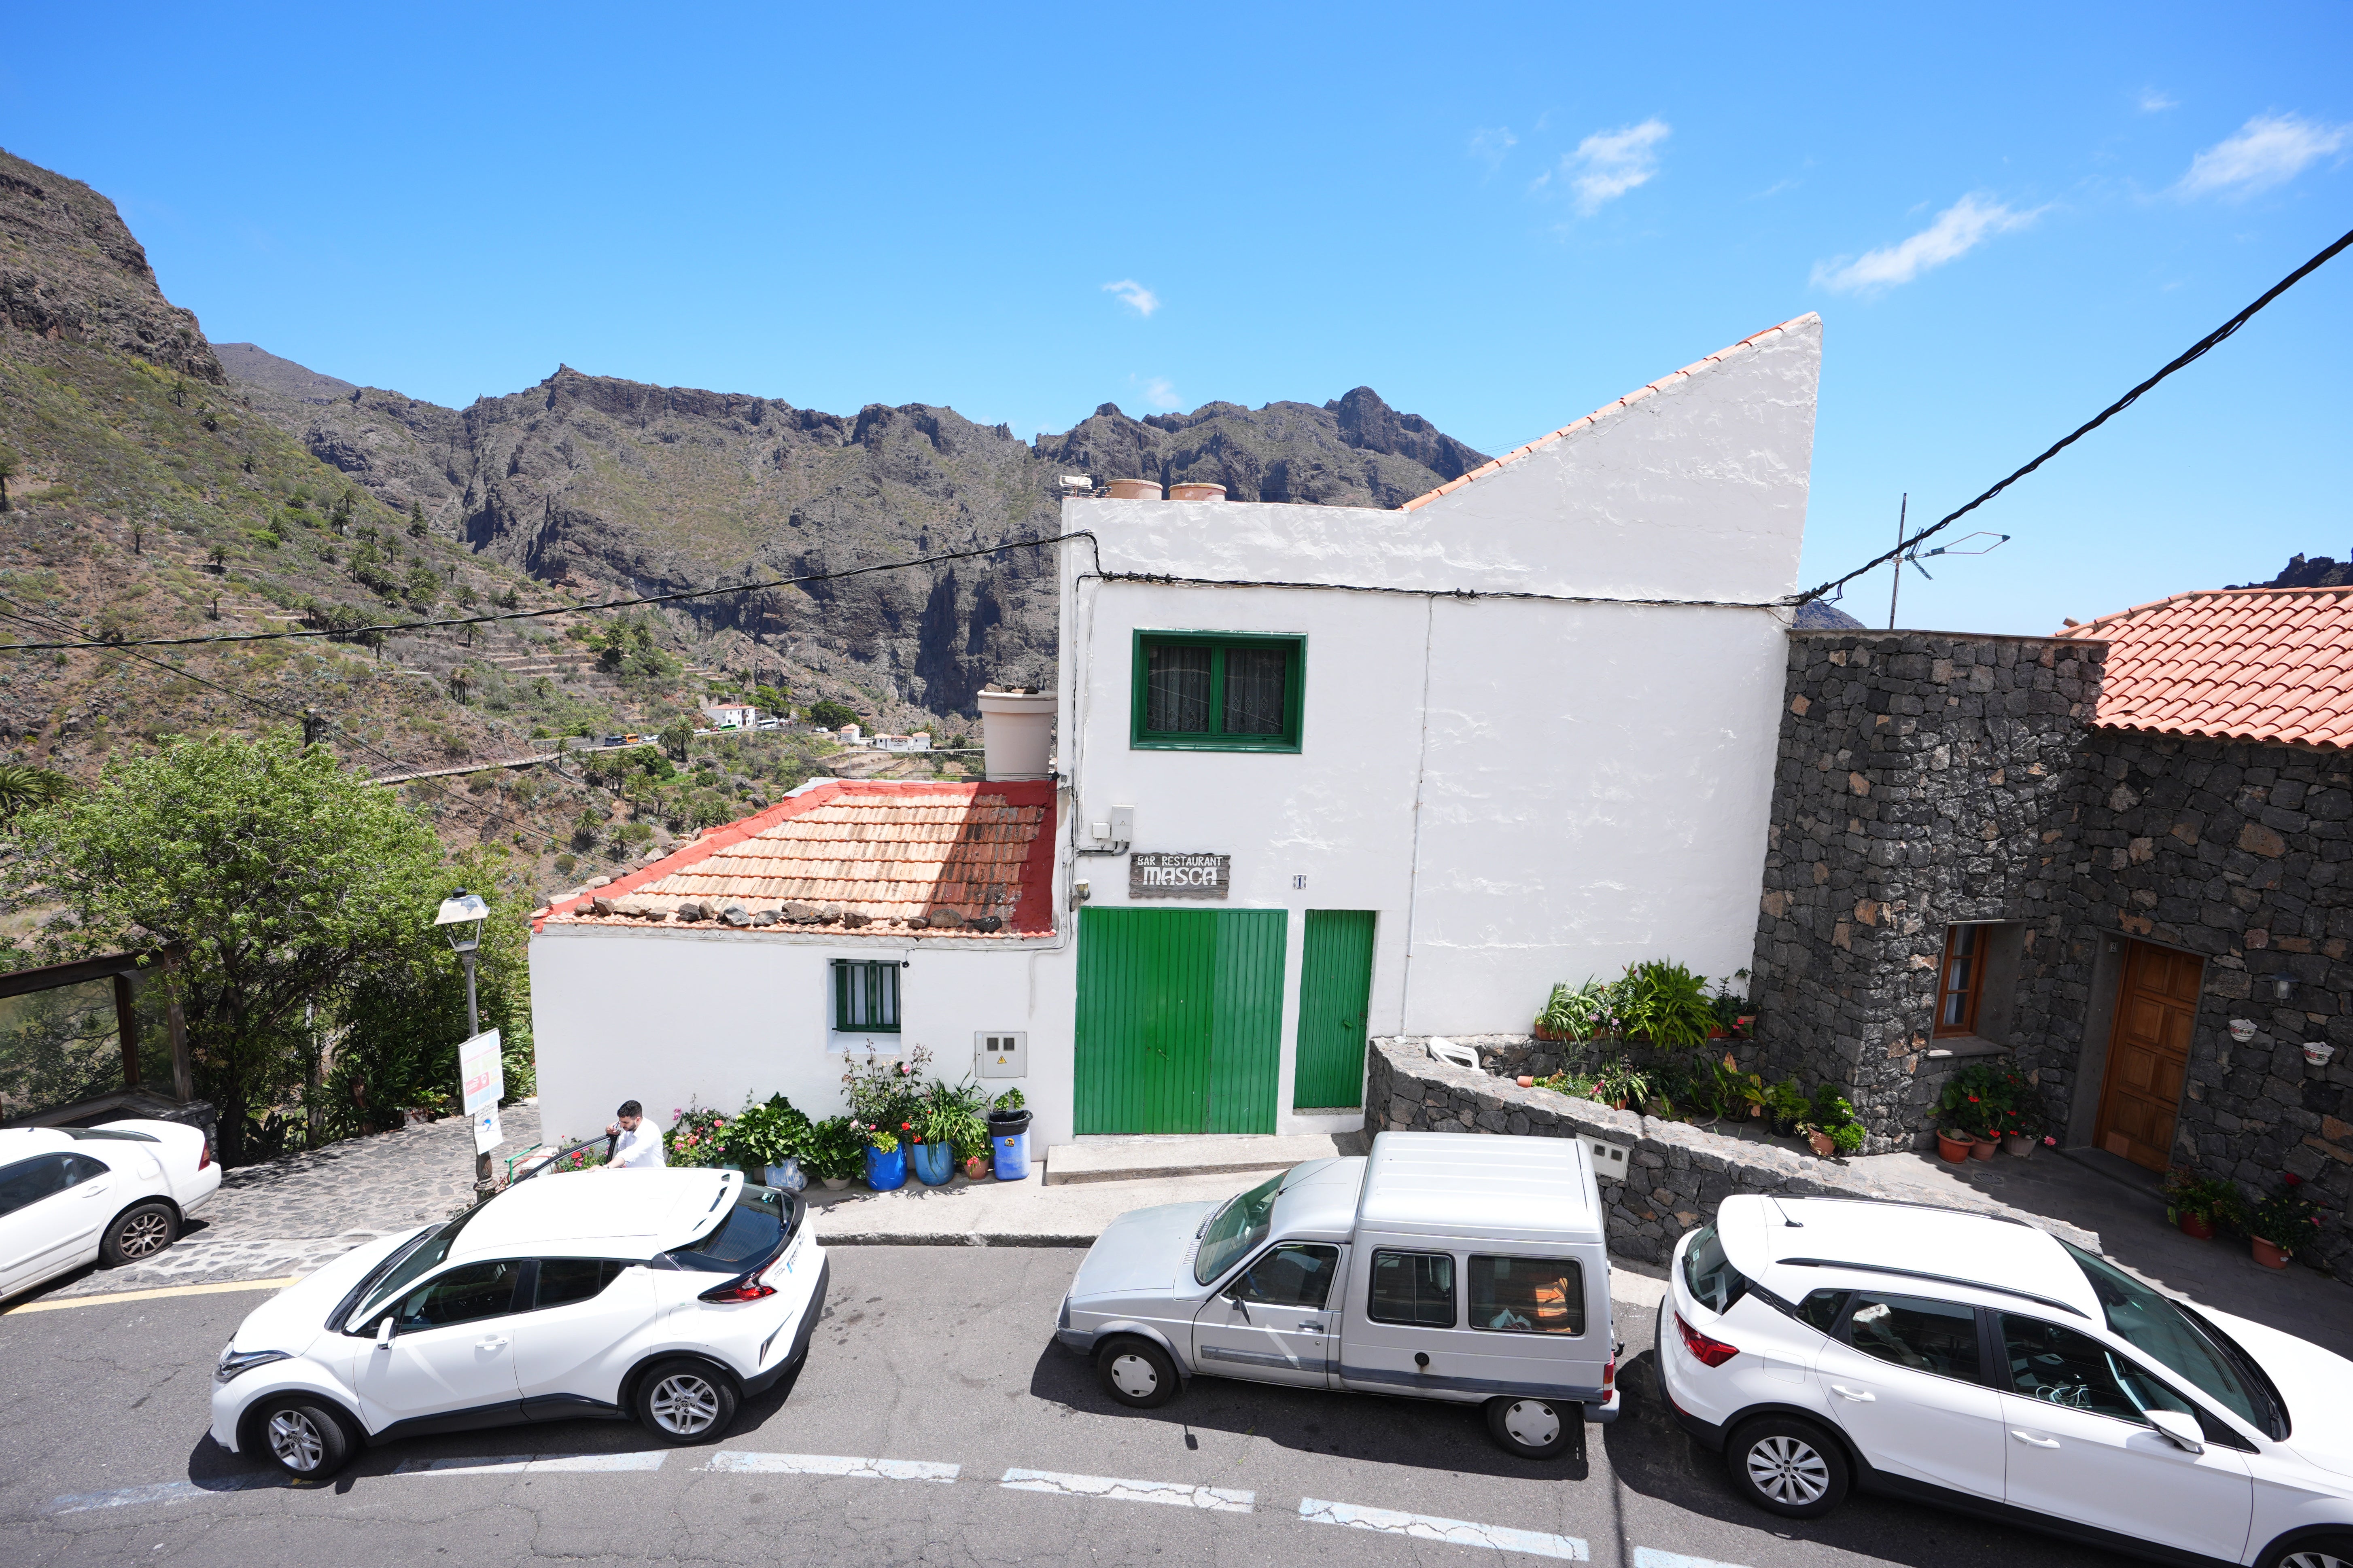 The Airbnb Casa Abuela Tina in Masca which Jay Slater travelled to (James Manning/PA)